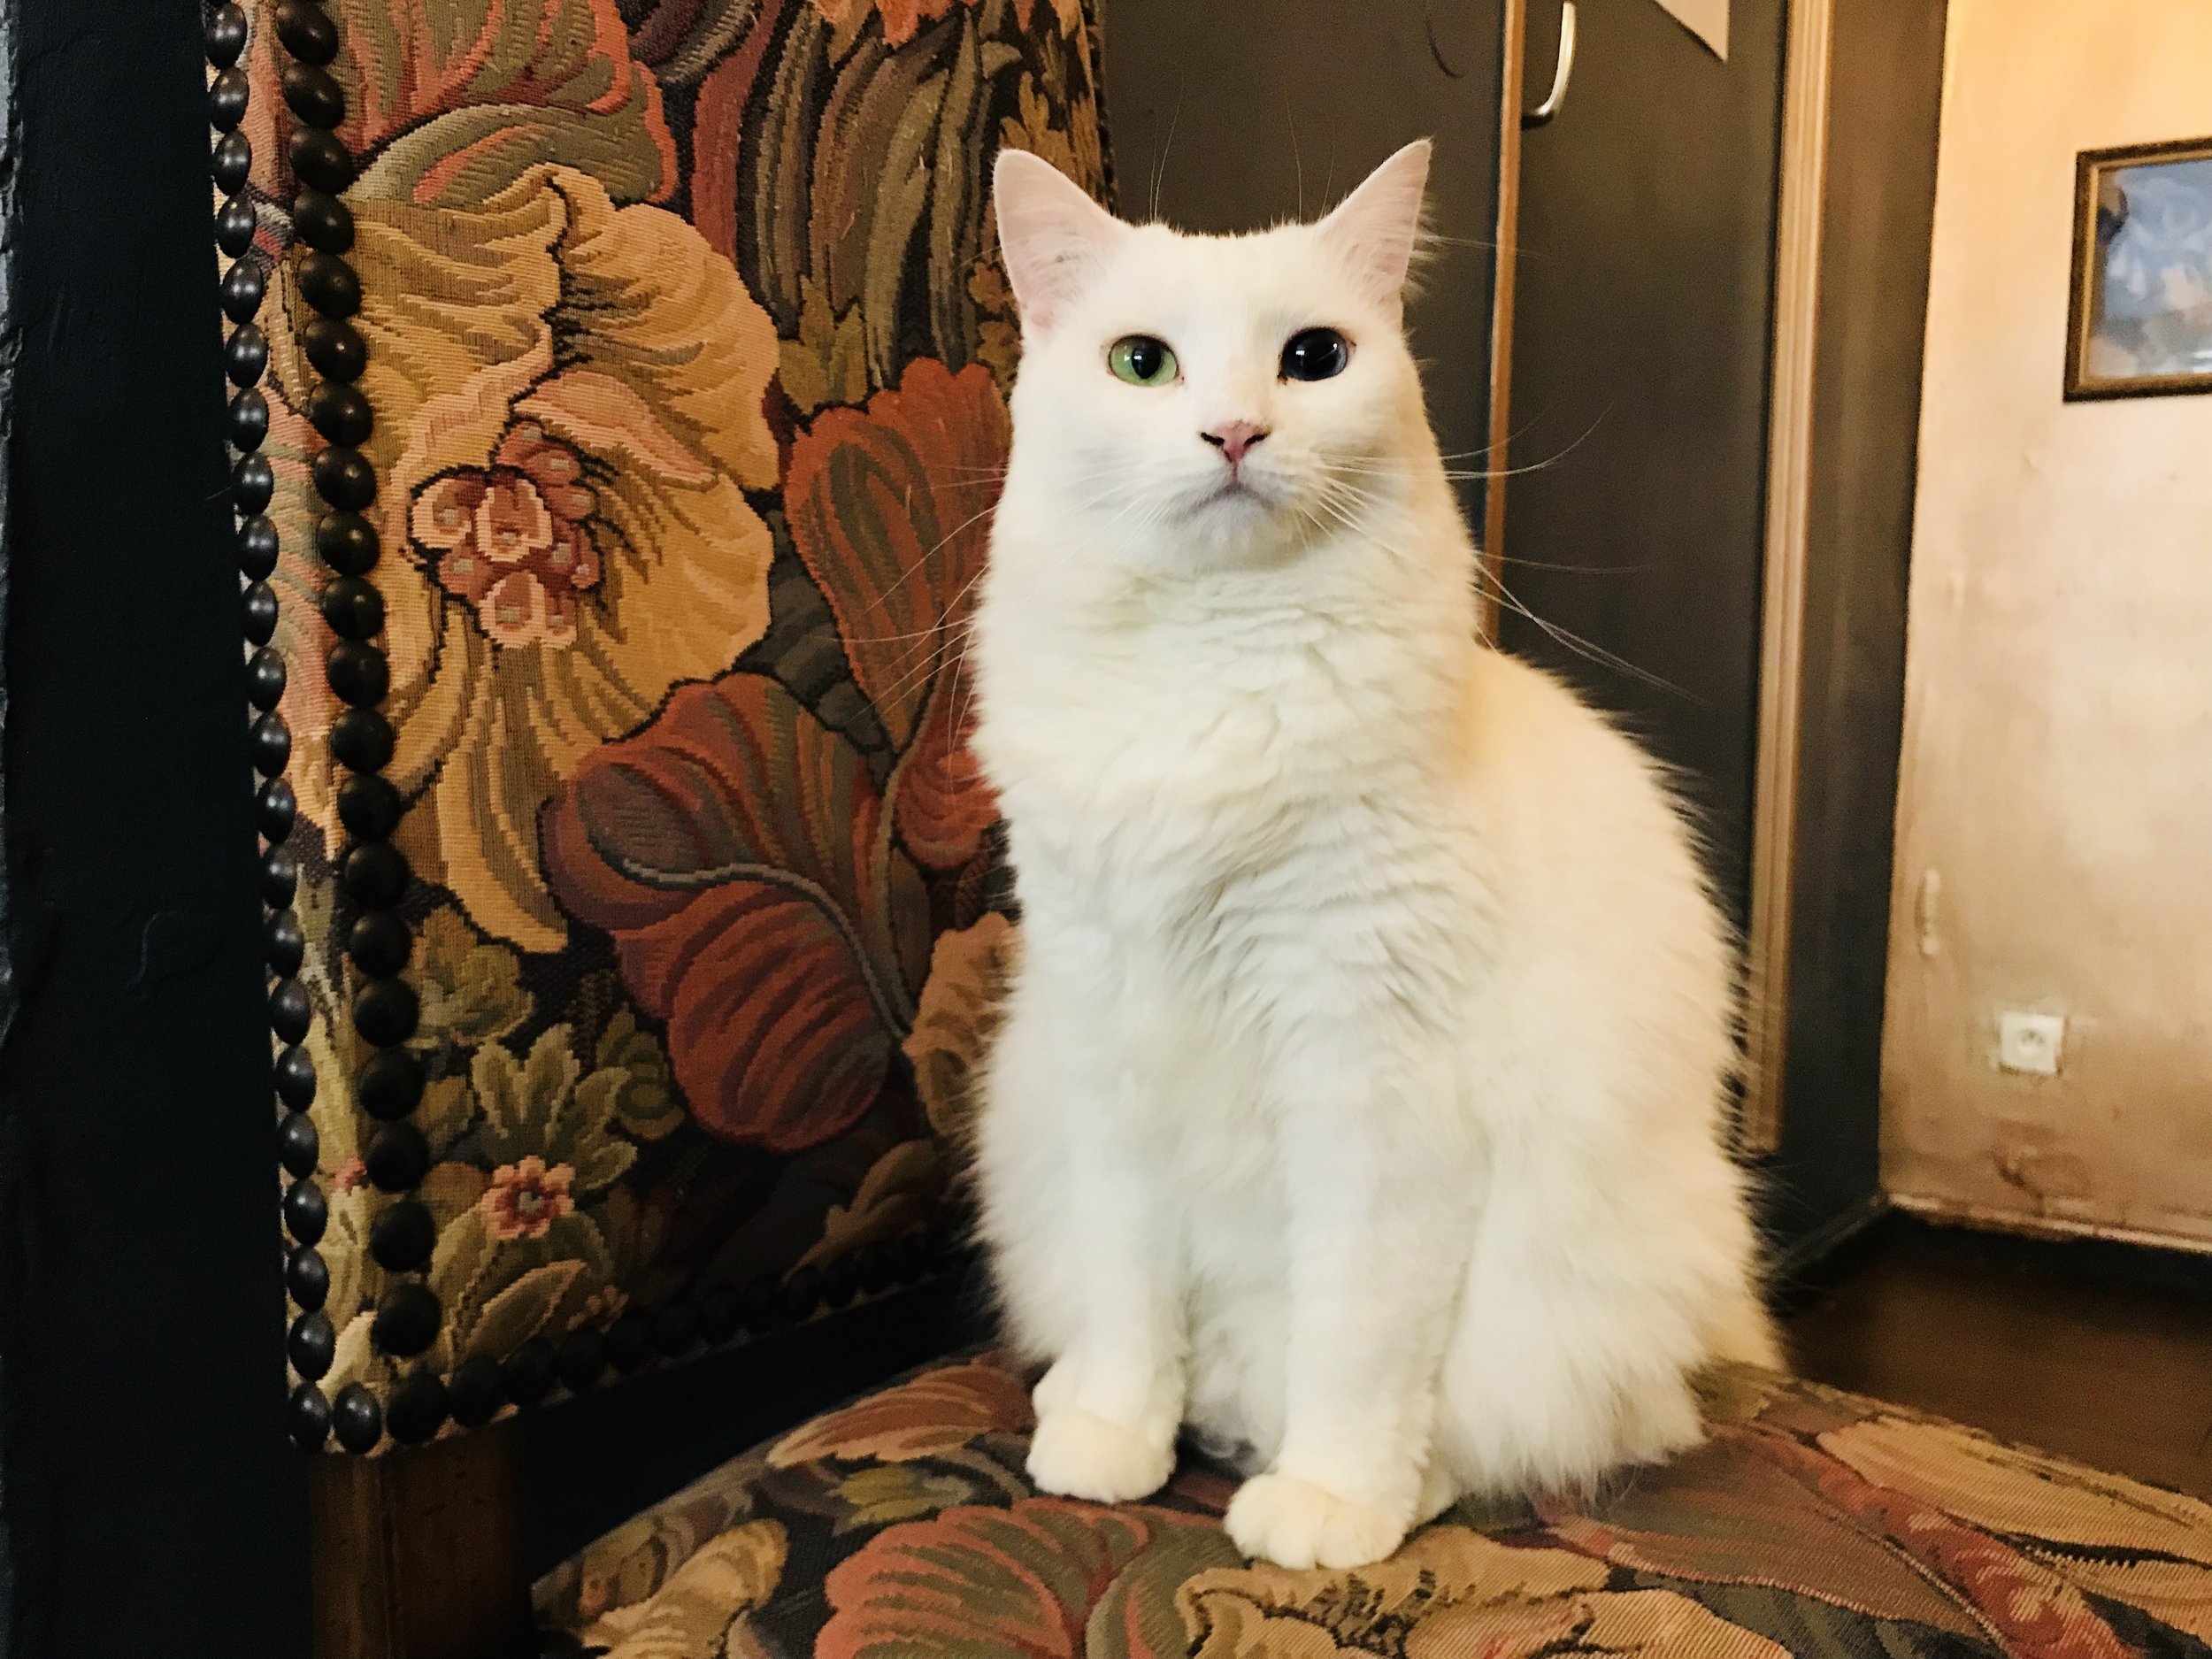 Le Cafe des Chats — The Neighbor's Cat